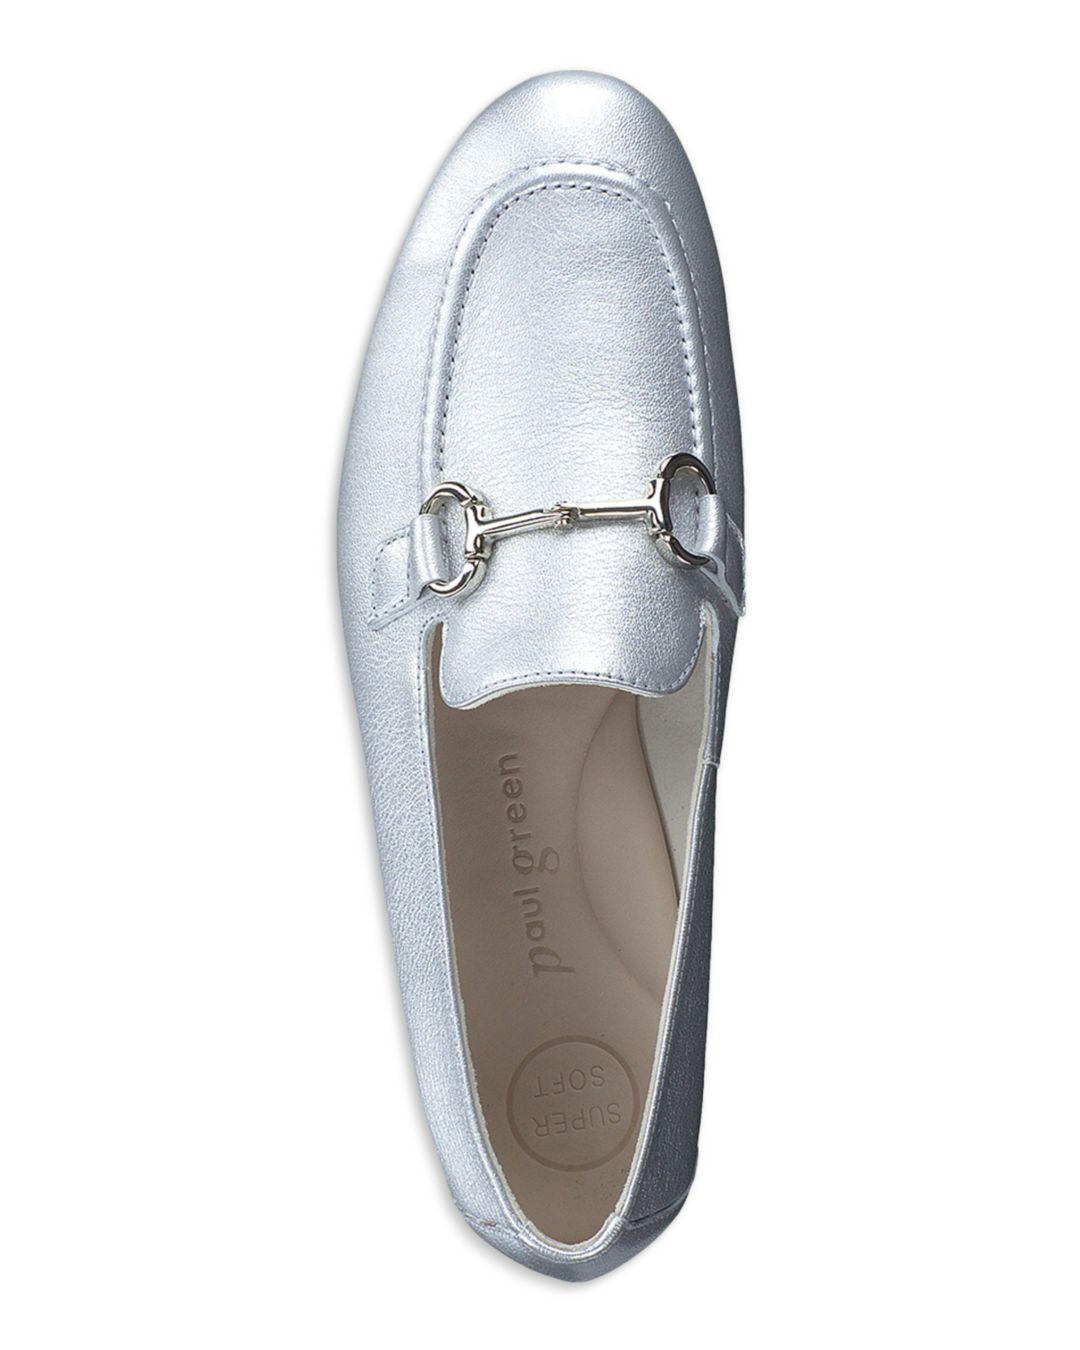 Paul Green Daphne Apron Toe Loafers in White | Lyst